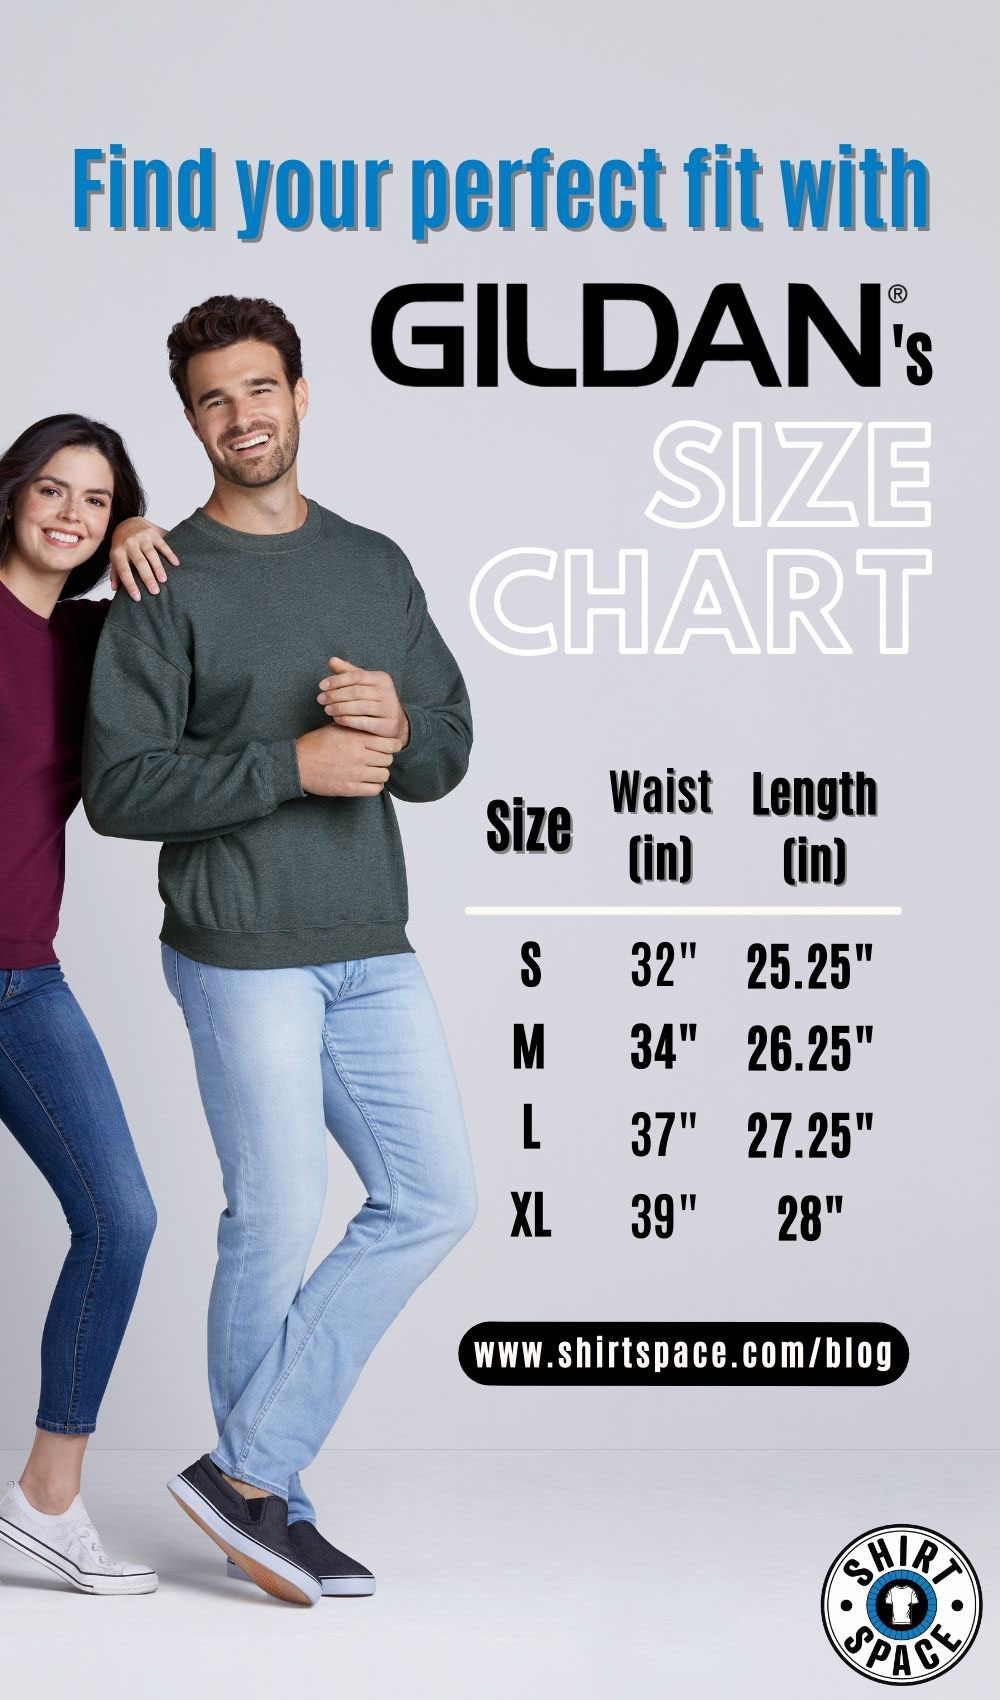 Pinterest pin promoting ShirtSpace’s guide on how to find the perfect fit using Gildan’s size chart. 